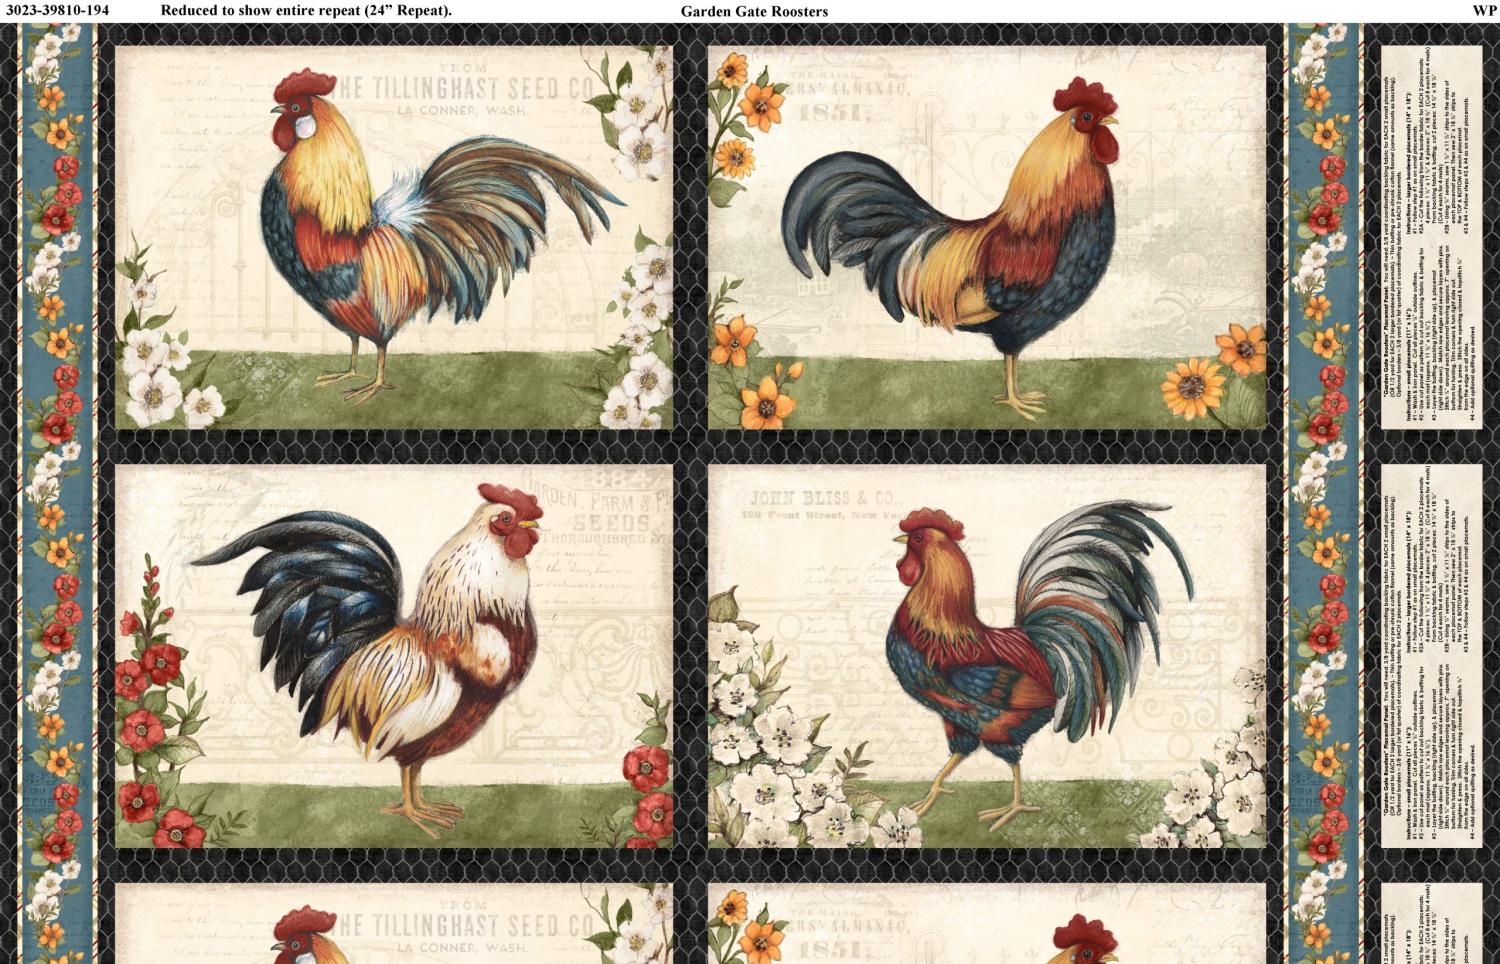 Garden Gate Roosters Placemats 24"x42" aprox